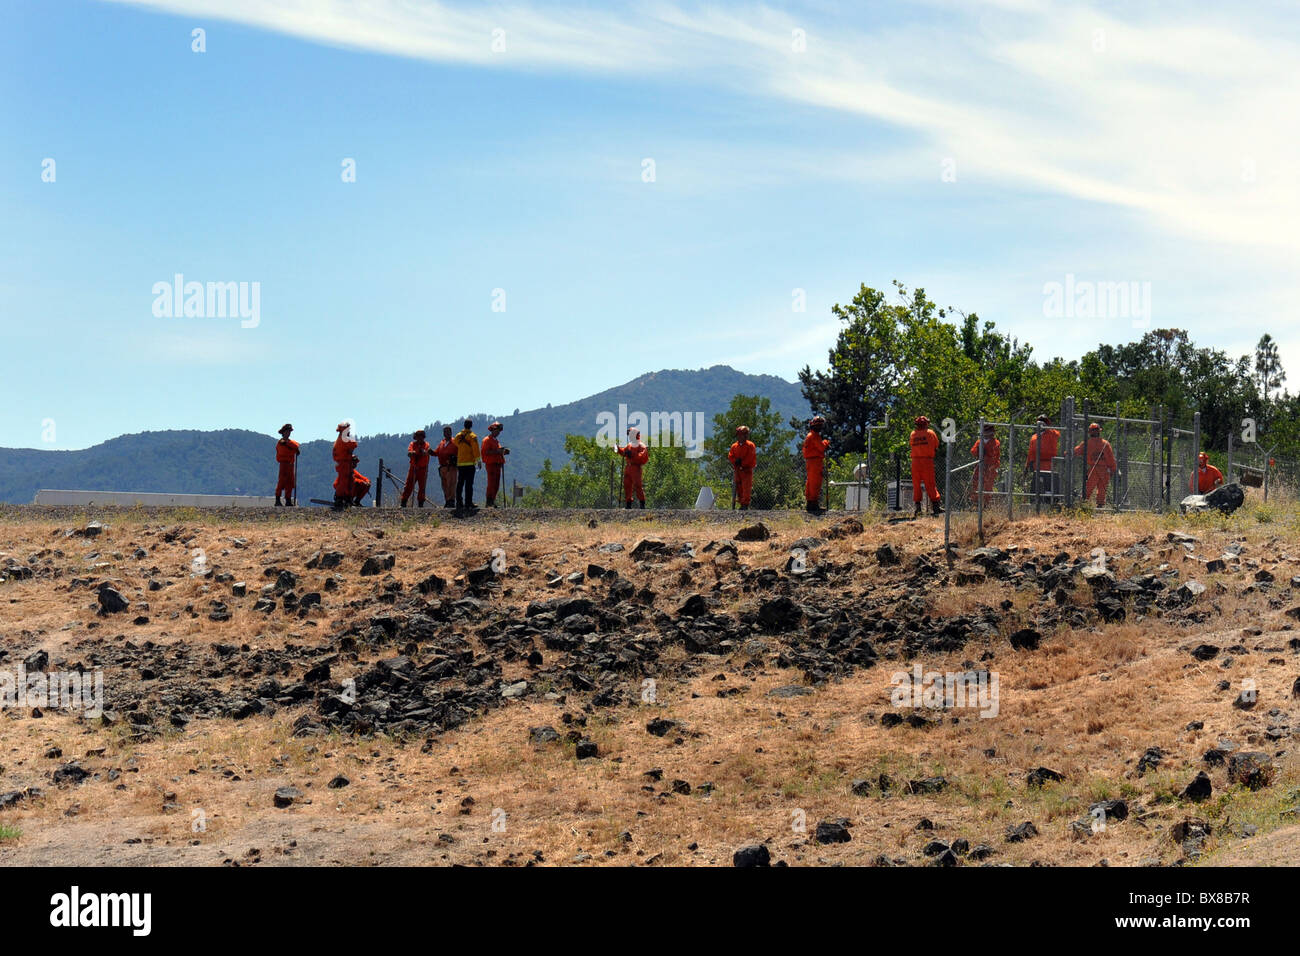 Prisoners repair a road as part of their rehabilitation back into the community, North California, USA Stock Photo